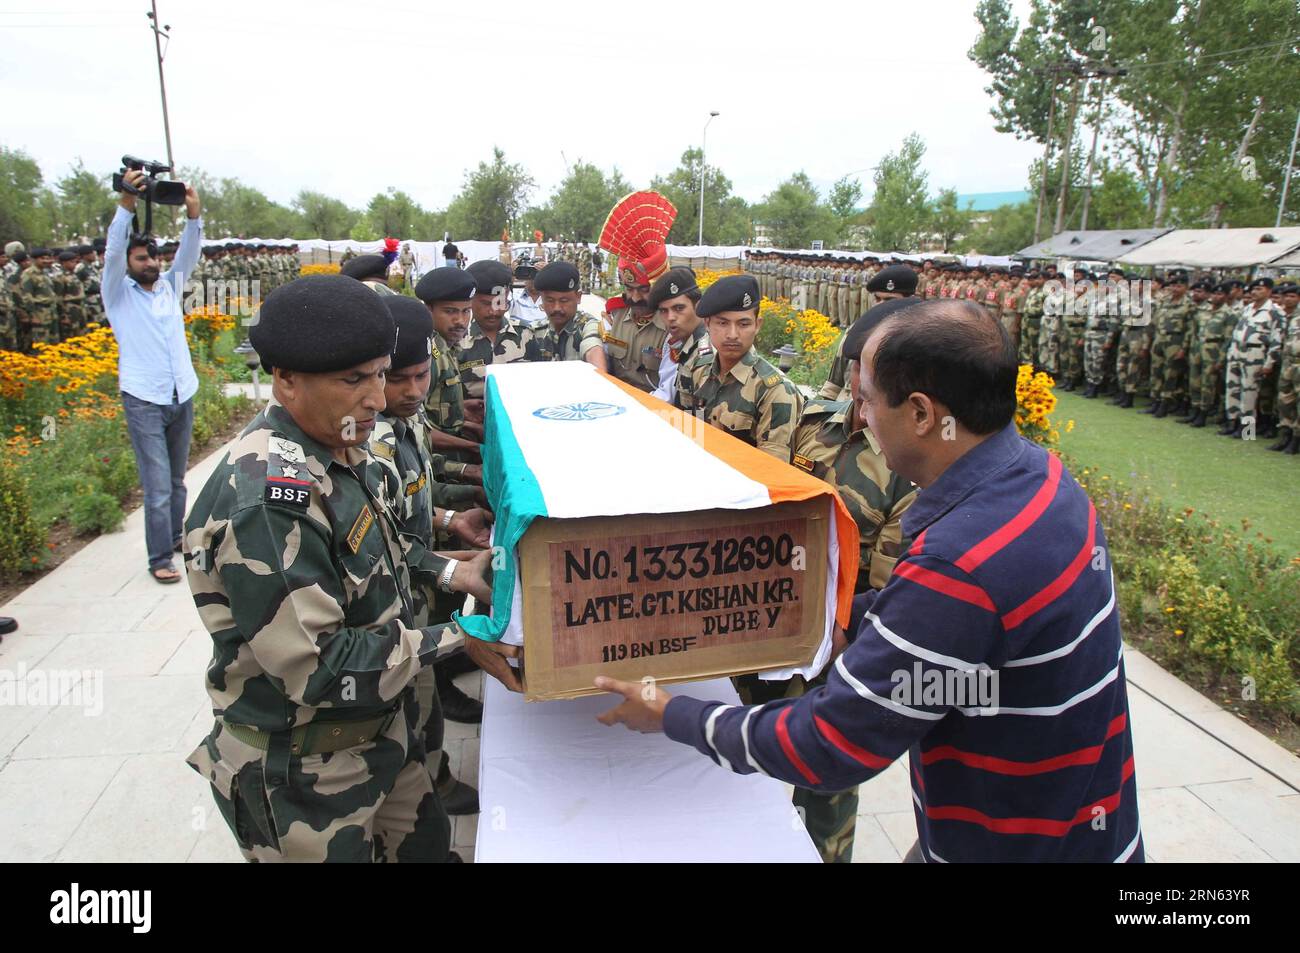 (150710) -- SRINAGAR, July 10, 2015 -- Border guards of India s Border Security Force (BSF) carry the coffin of their colleague at their base camp in Humhama, on the outskirts of Srinagar, summer capital of Indian-controlled Kashmir, on July 10, 2015. A border guard of India s BSF has been killed in firing from Pakistan side on Line of Control (LoC) dividing Kashmir. ) KASHMIR-SRINAGAR-BORDER GUARD-WREATH LAYING JavedxDar PUBLICATIONxNOTxINxCHN   150710 Srinagar July 10 2015 Border Guards of India S Border Security Force BSF Carry The Coffin of their colleague AT their Base Camp in Humhama ON Stock Photo